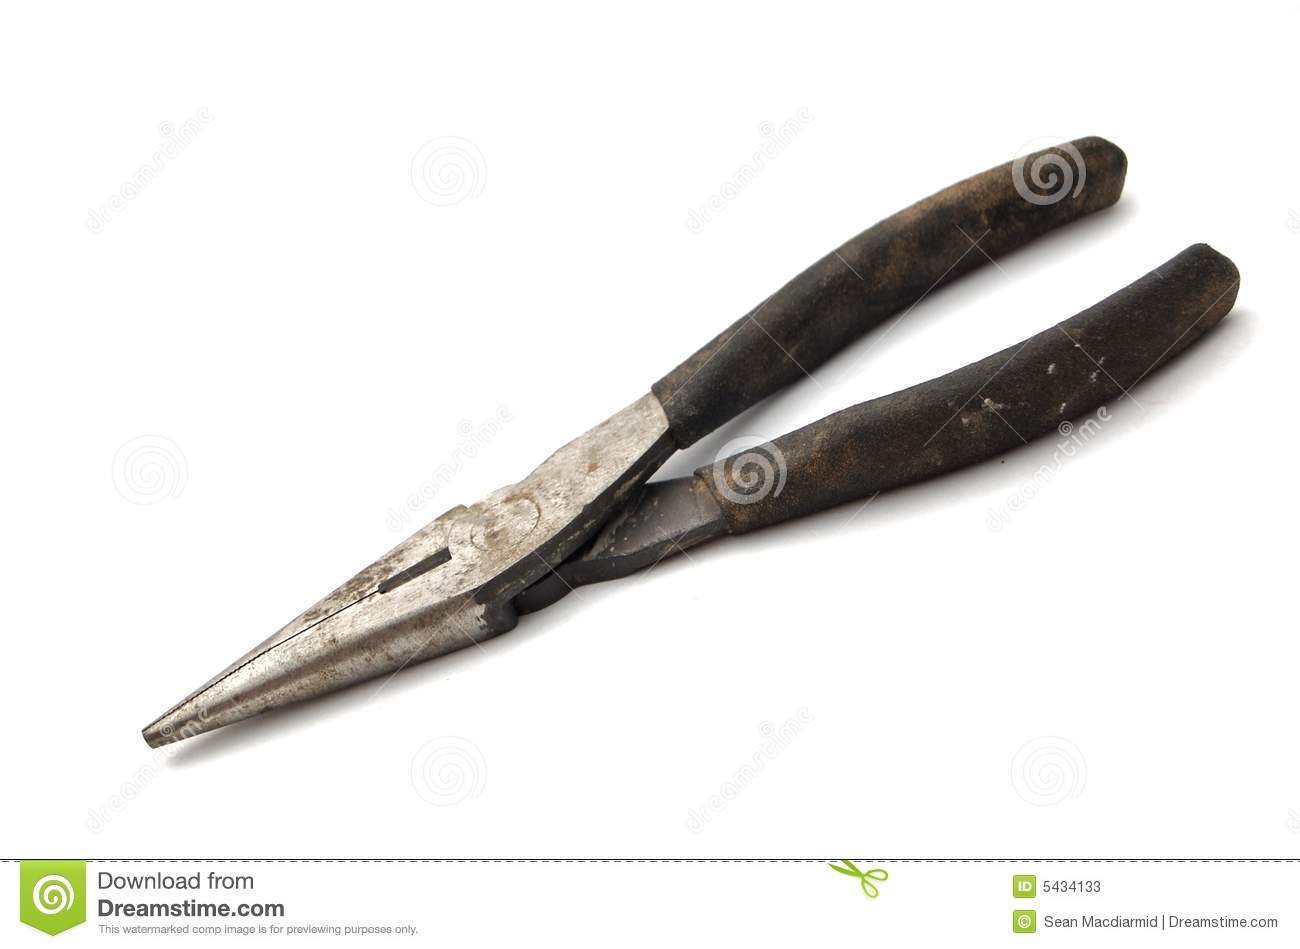 Photograph Of Needle Nose Pliers Against A White Background